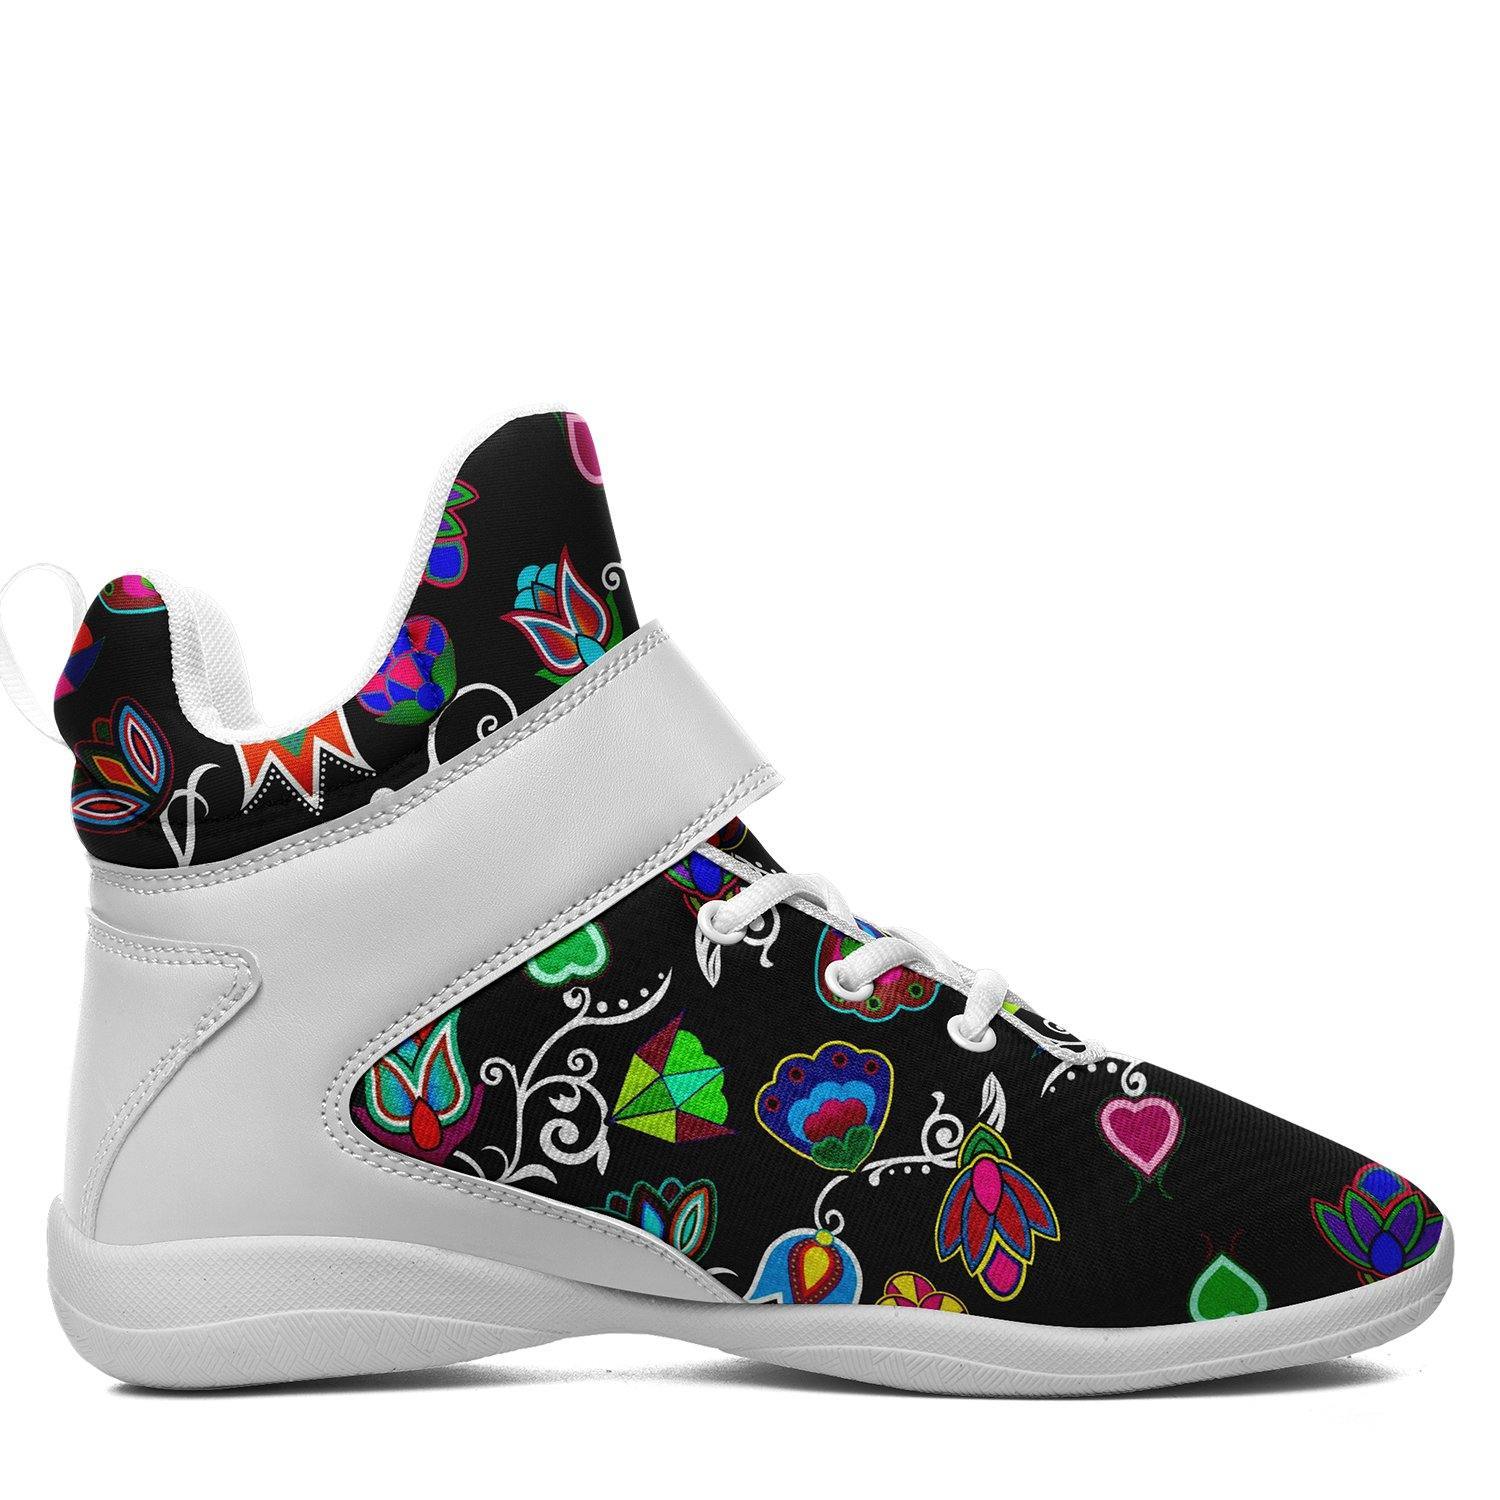 Indigenous Paisley Black Ipottaa Basketball / Sport High Top Shoes - White Sole 49 Dzine 